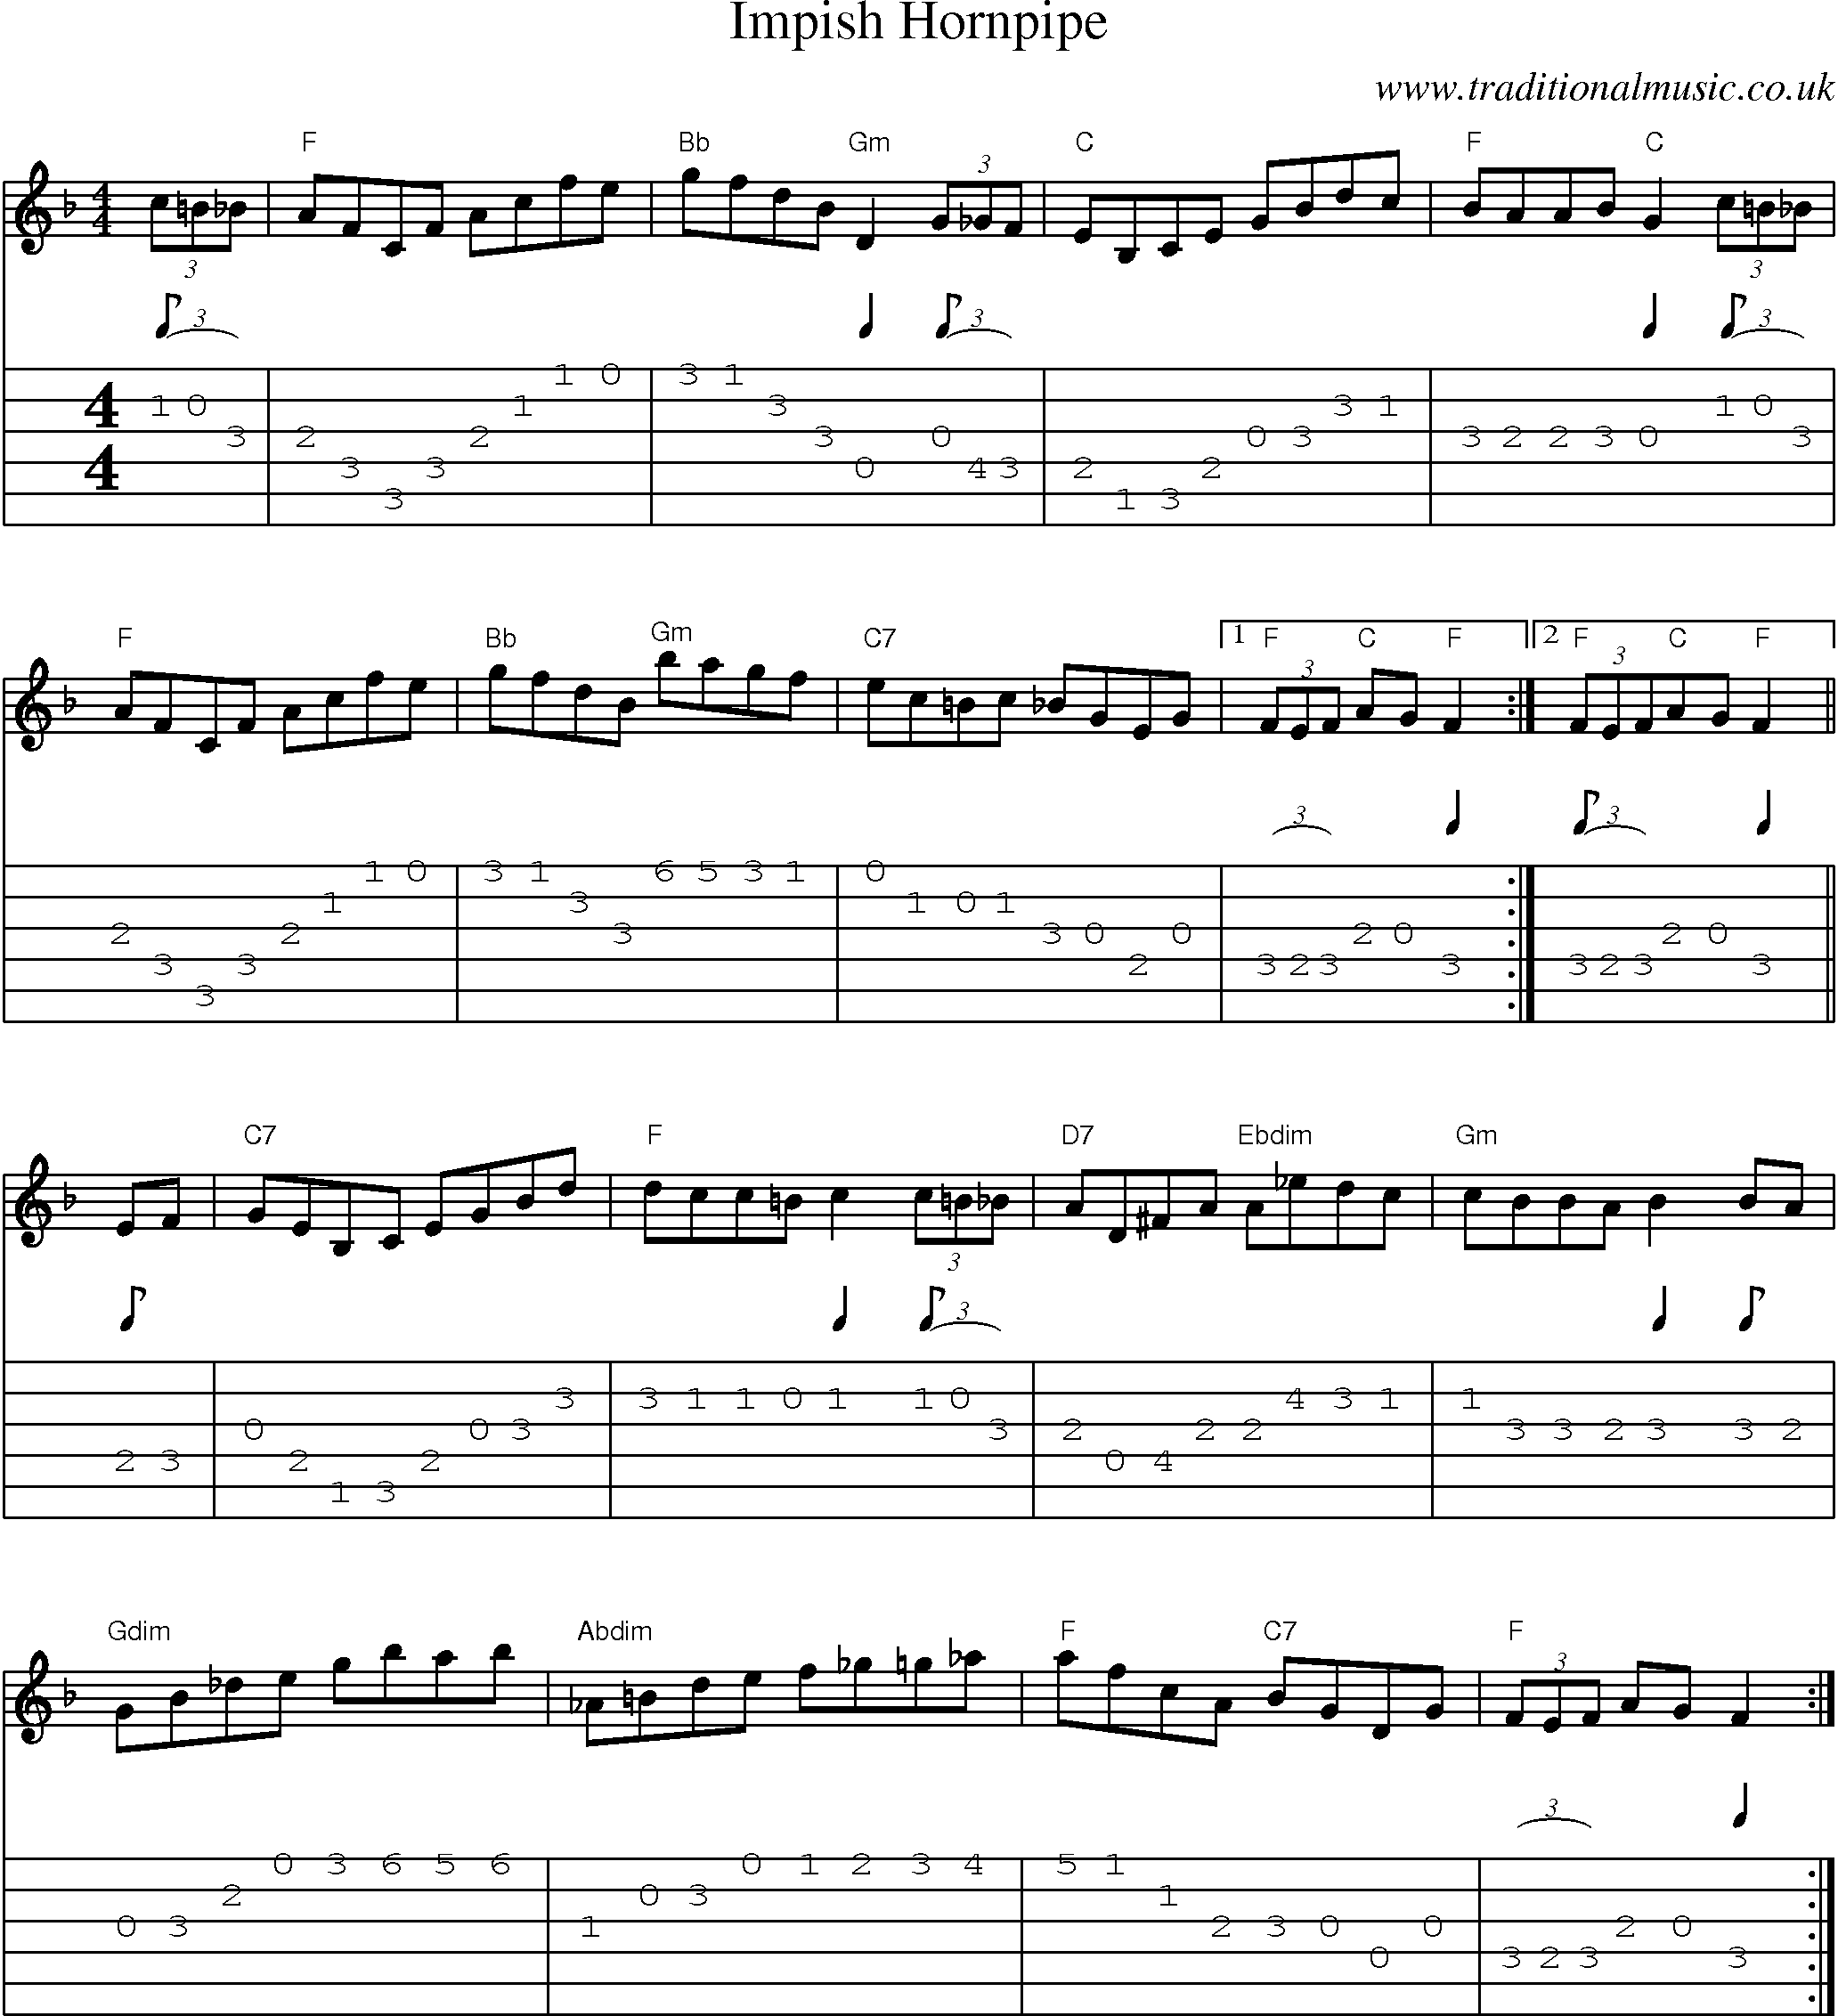 Music Score and Guitar Tabs for Impish Hornpipe